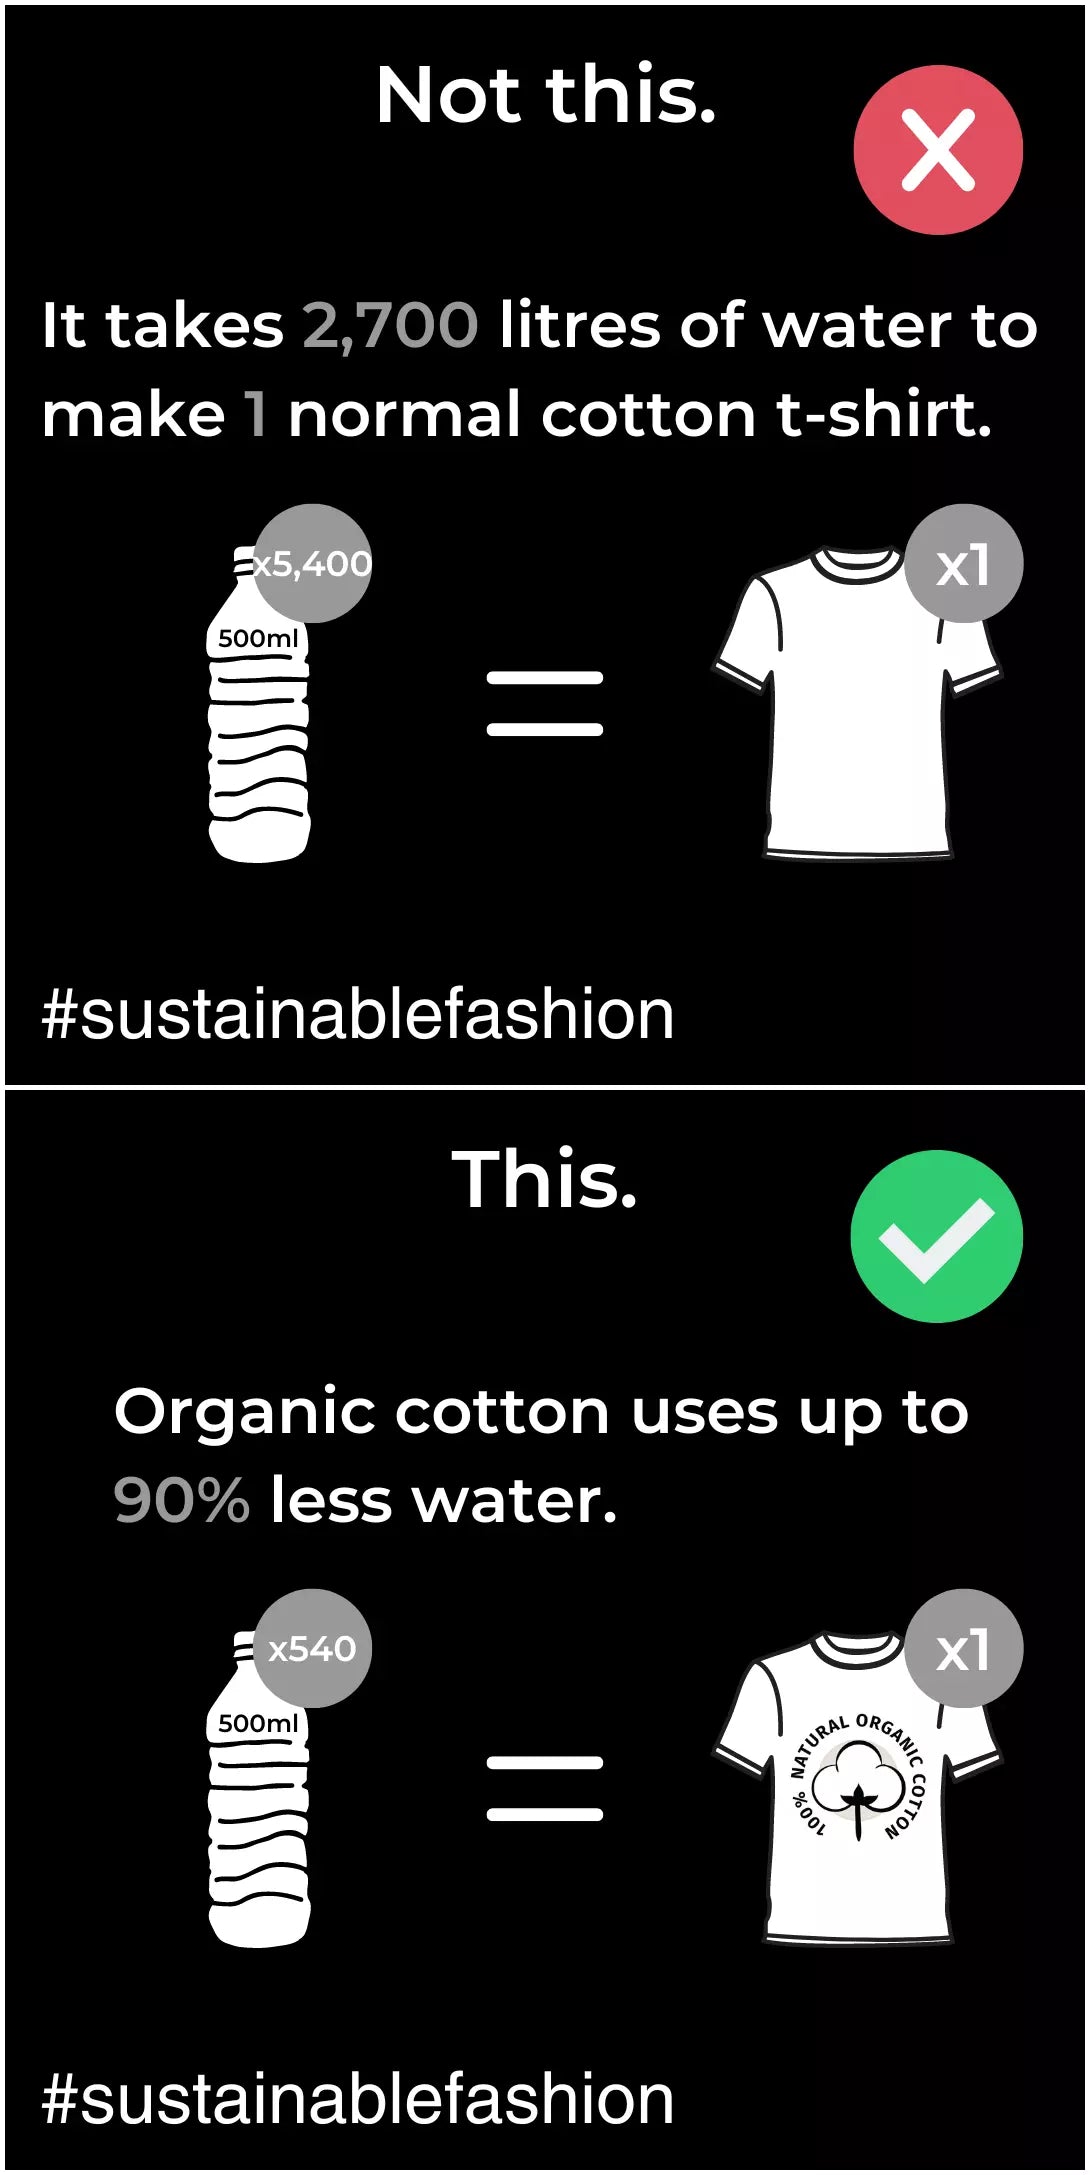 Organic cotton uses up to 90% less water than normal cotton.